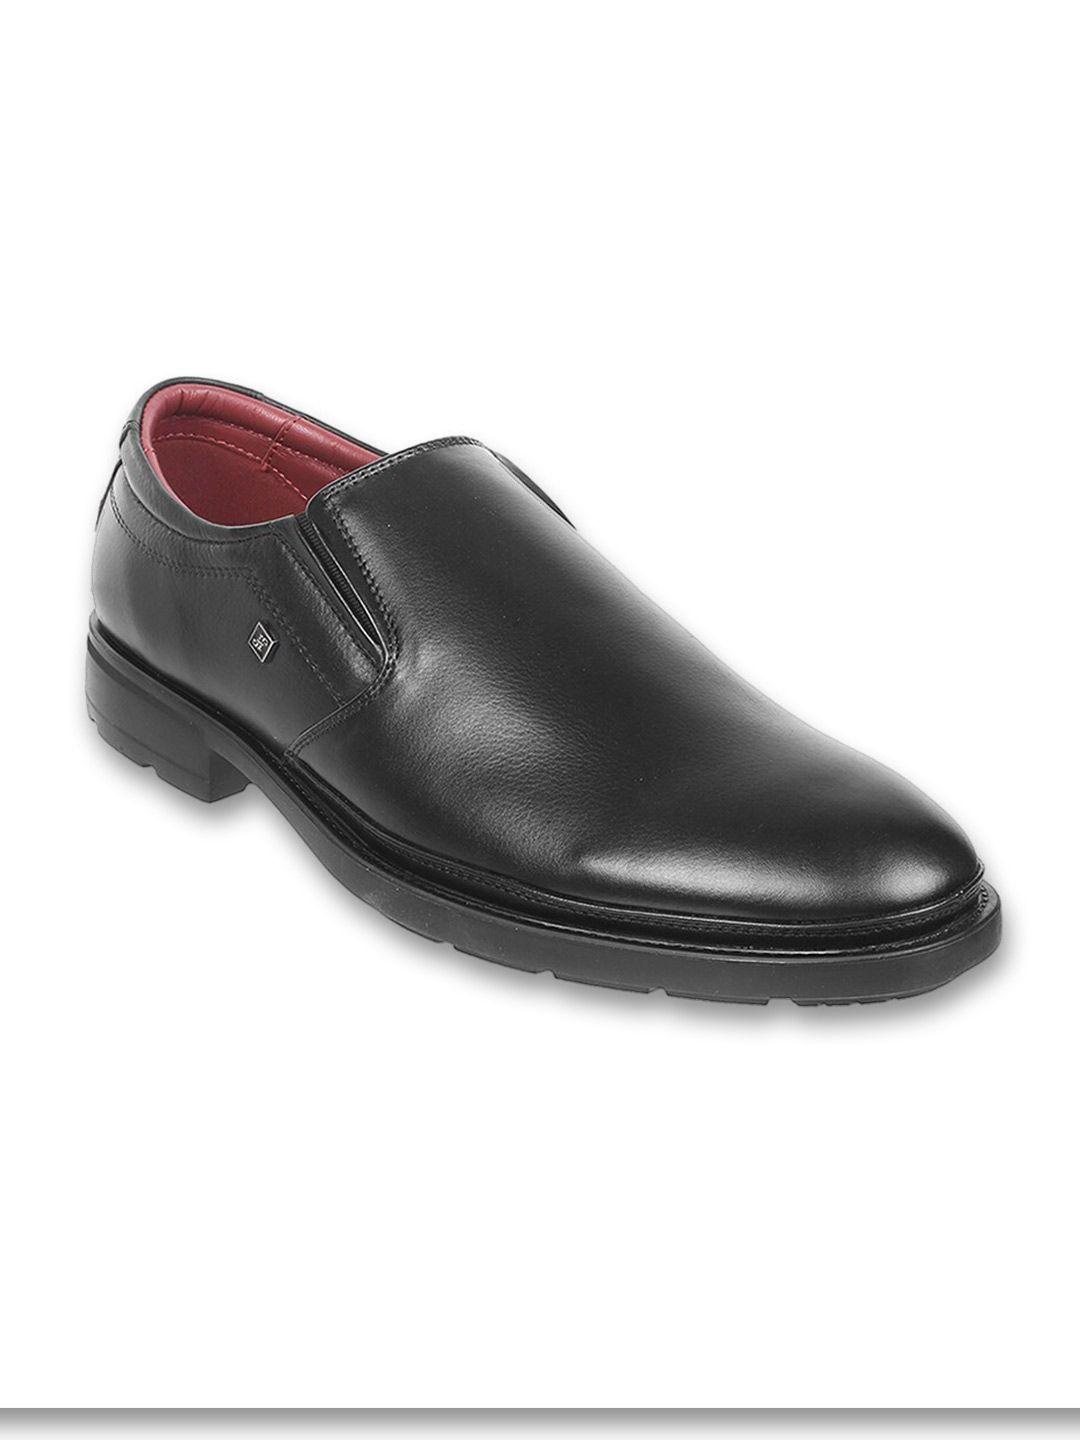 j.fontini men pointed toe leather formal slip on shoes